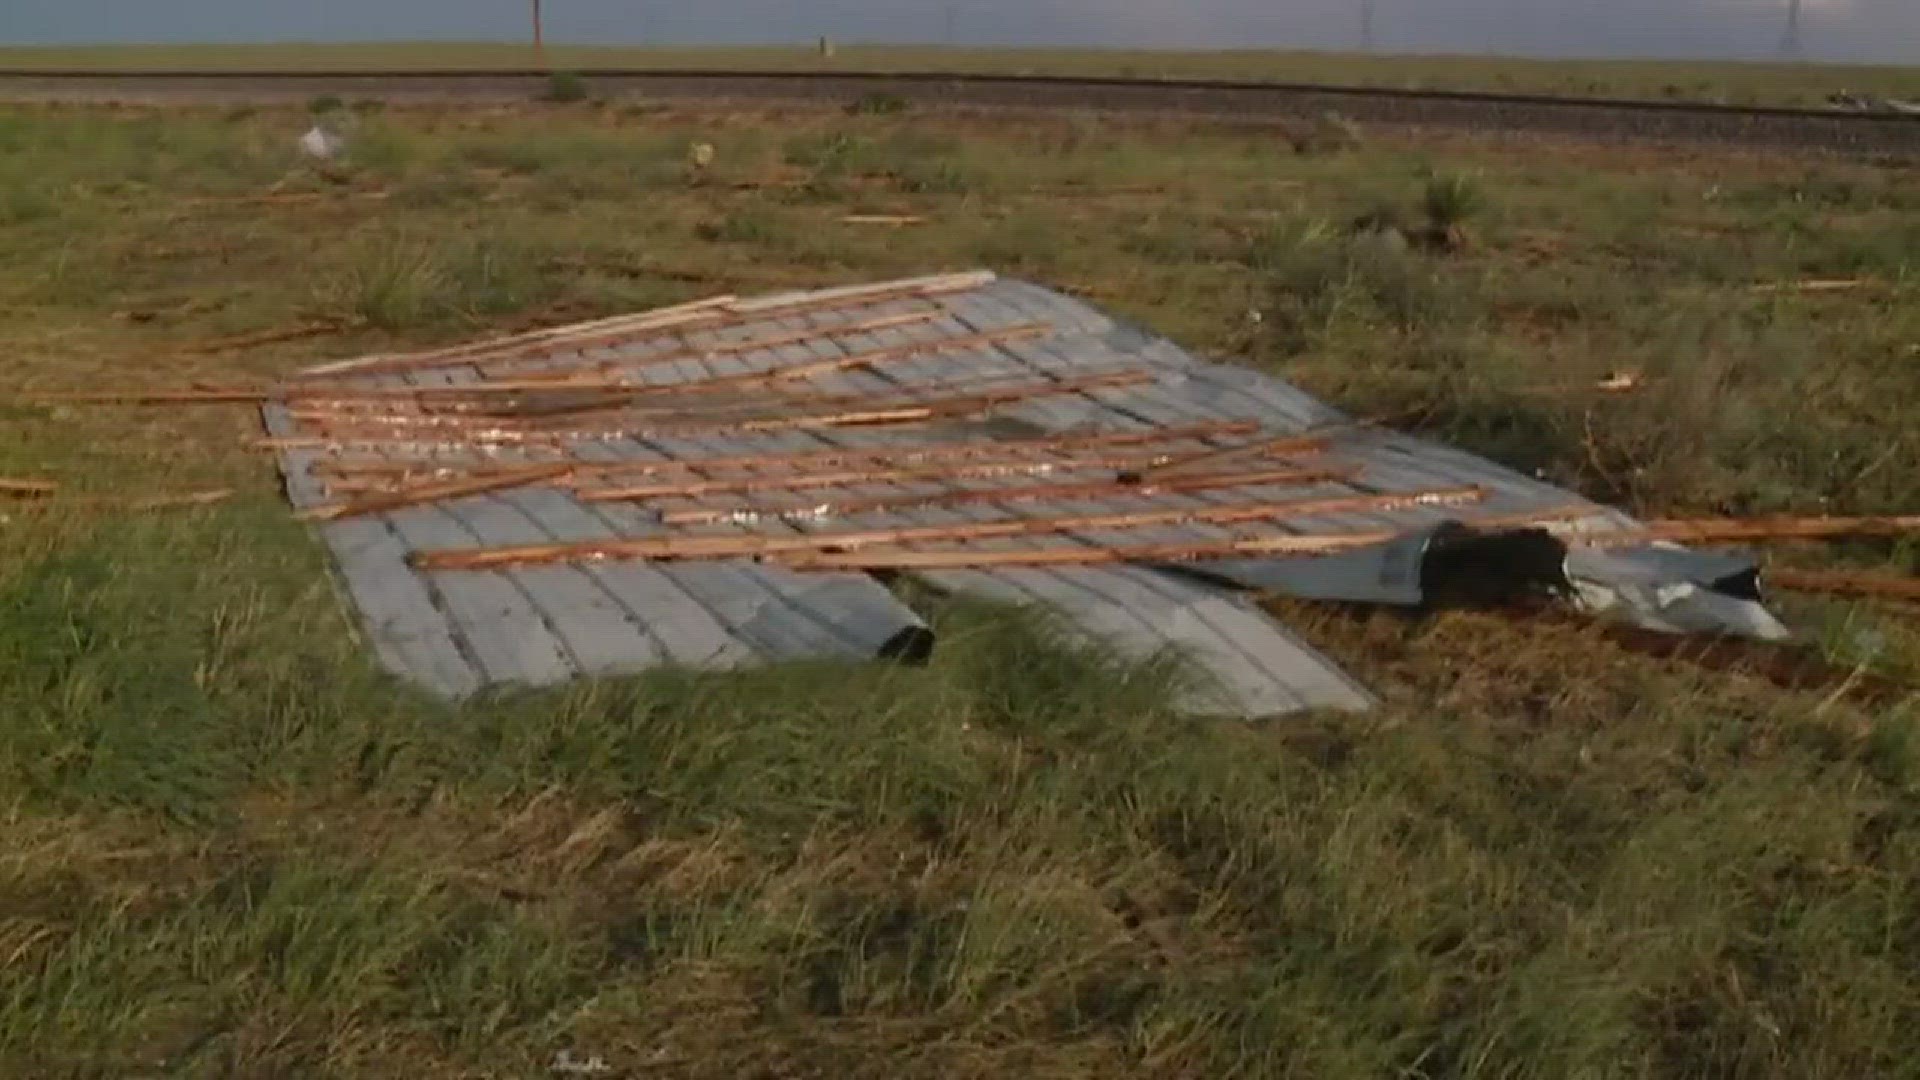 Residents believe a tornado touched down in Brush causing a lot of damage but no injuries.